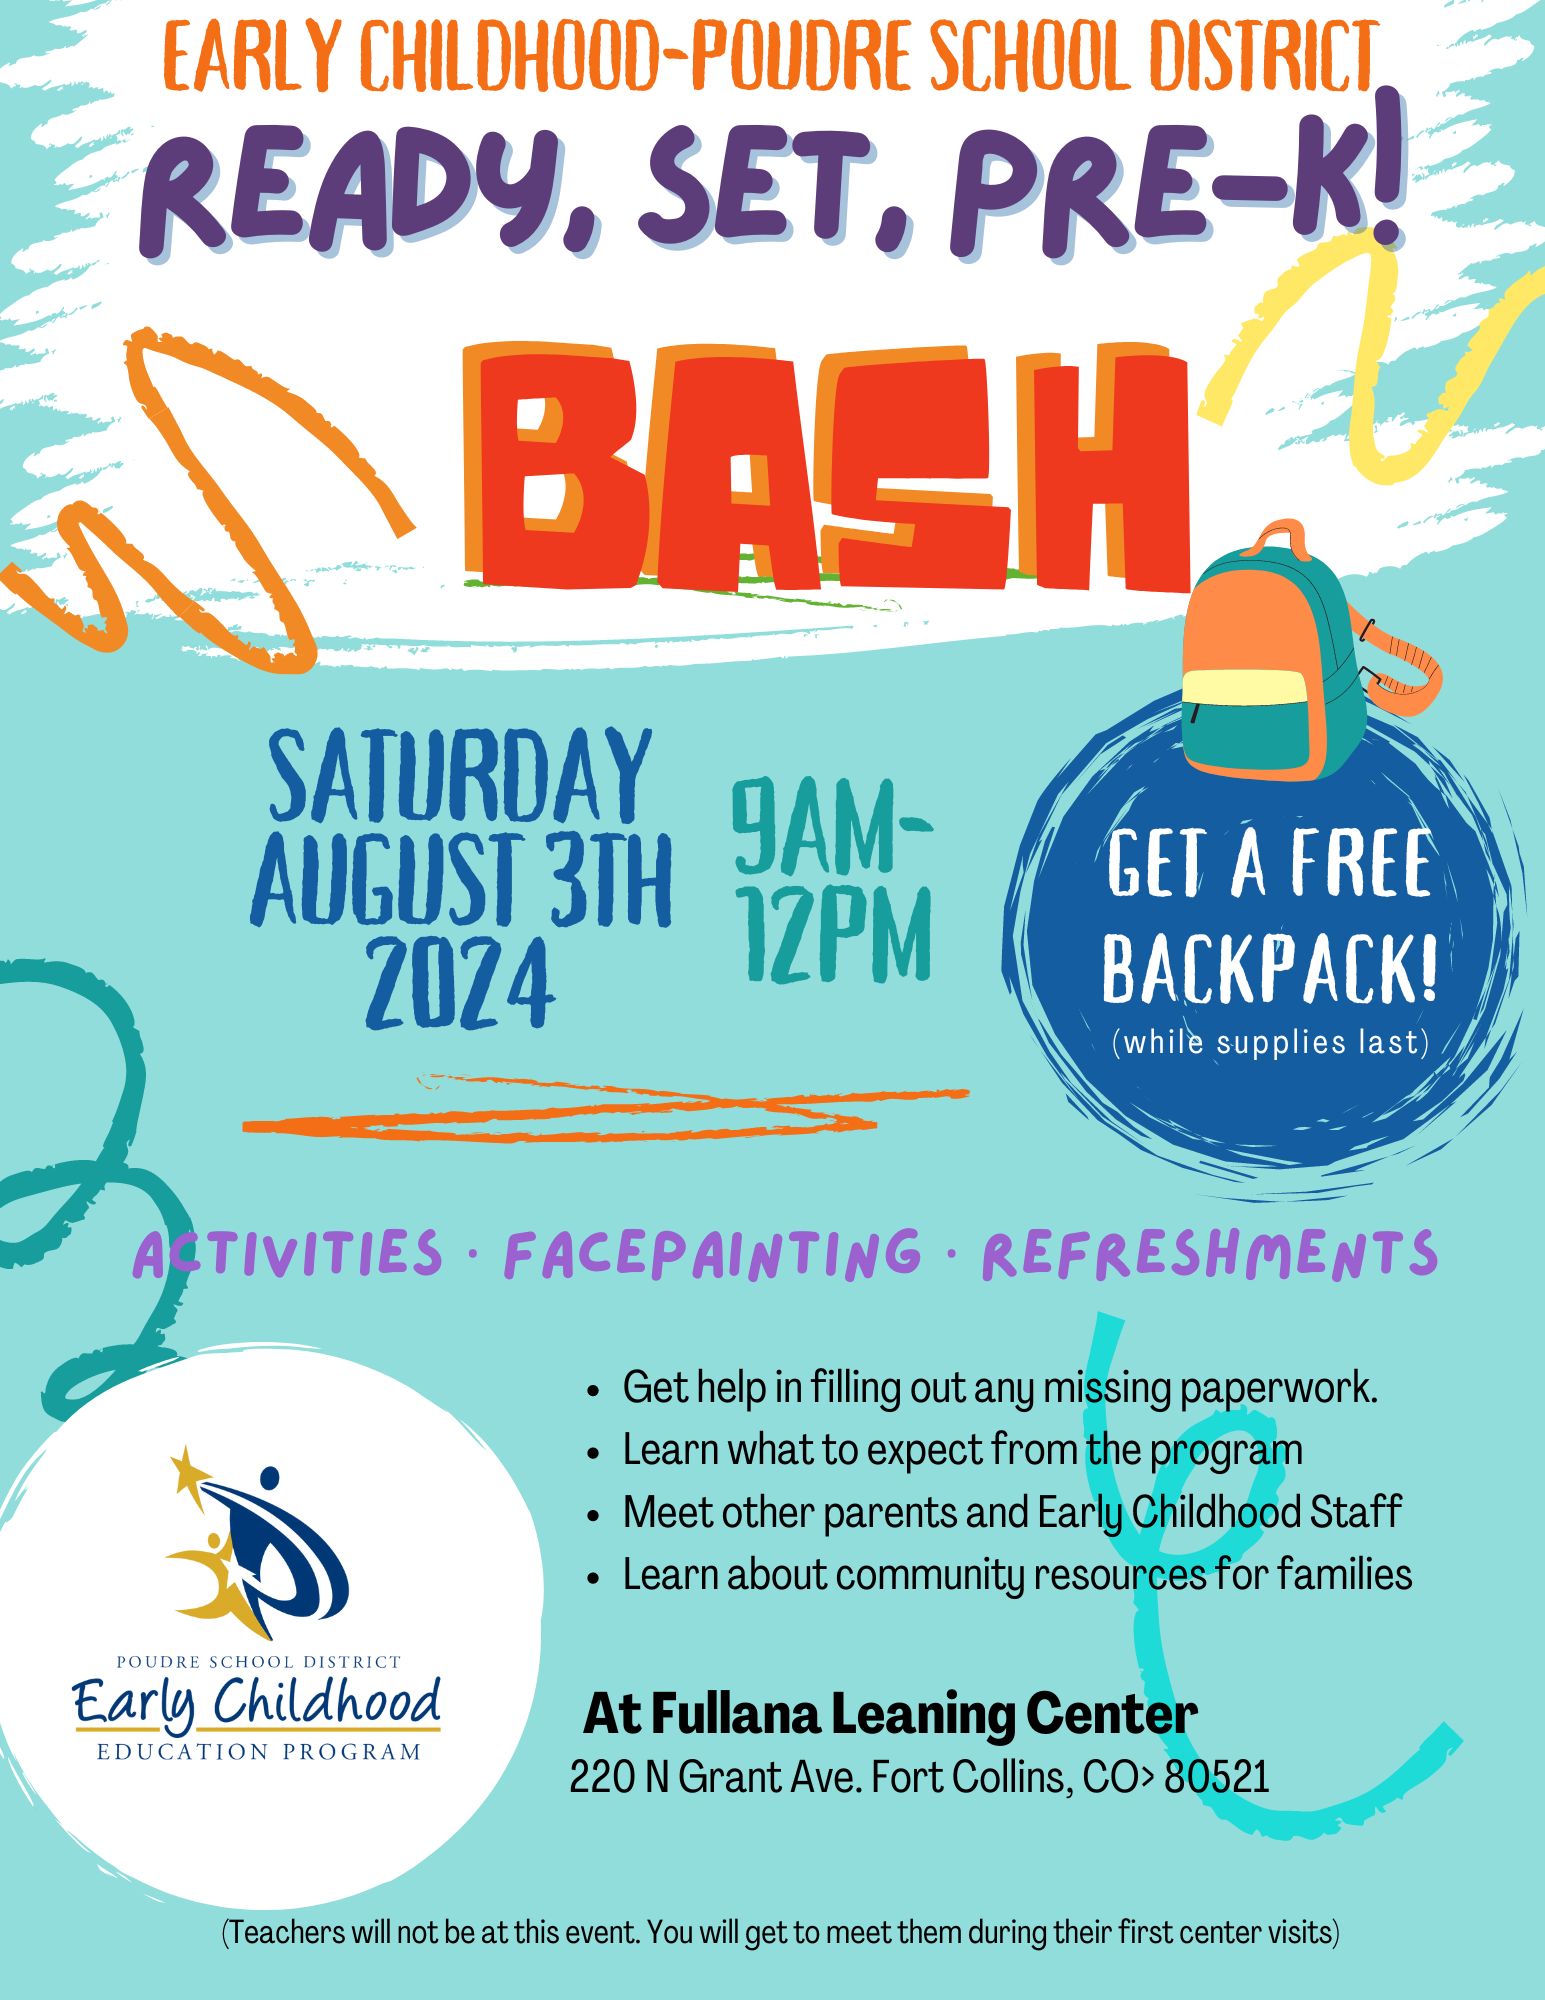 Back to School Bash. Saturday August 3rd 9-12 at Fullana, 220 N. Grant Ave., Fort Collins, CO. Learn more about our program, activities, community partners, meet other parents!